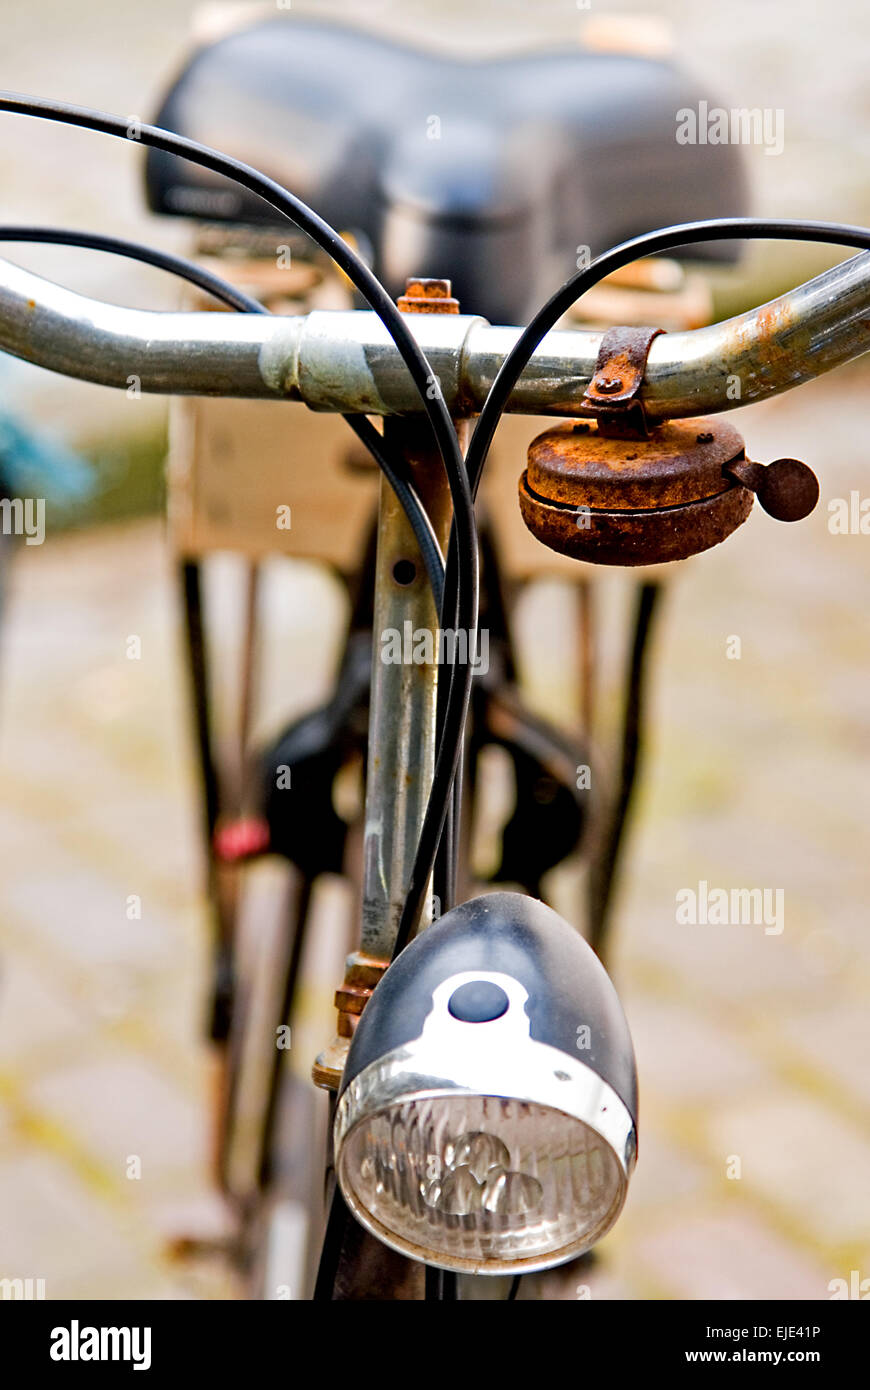 Abstract image of bicycle and bicycle parts in Amsterdam Stock Photo